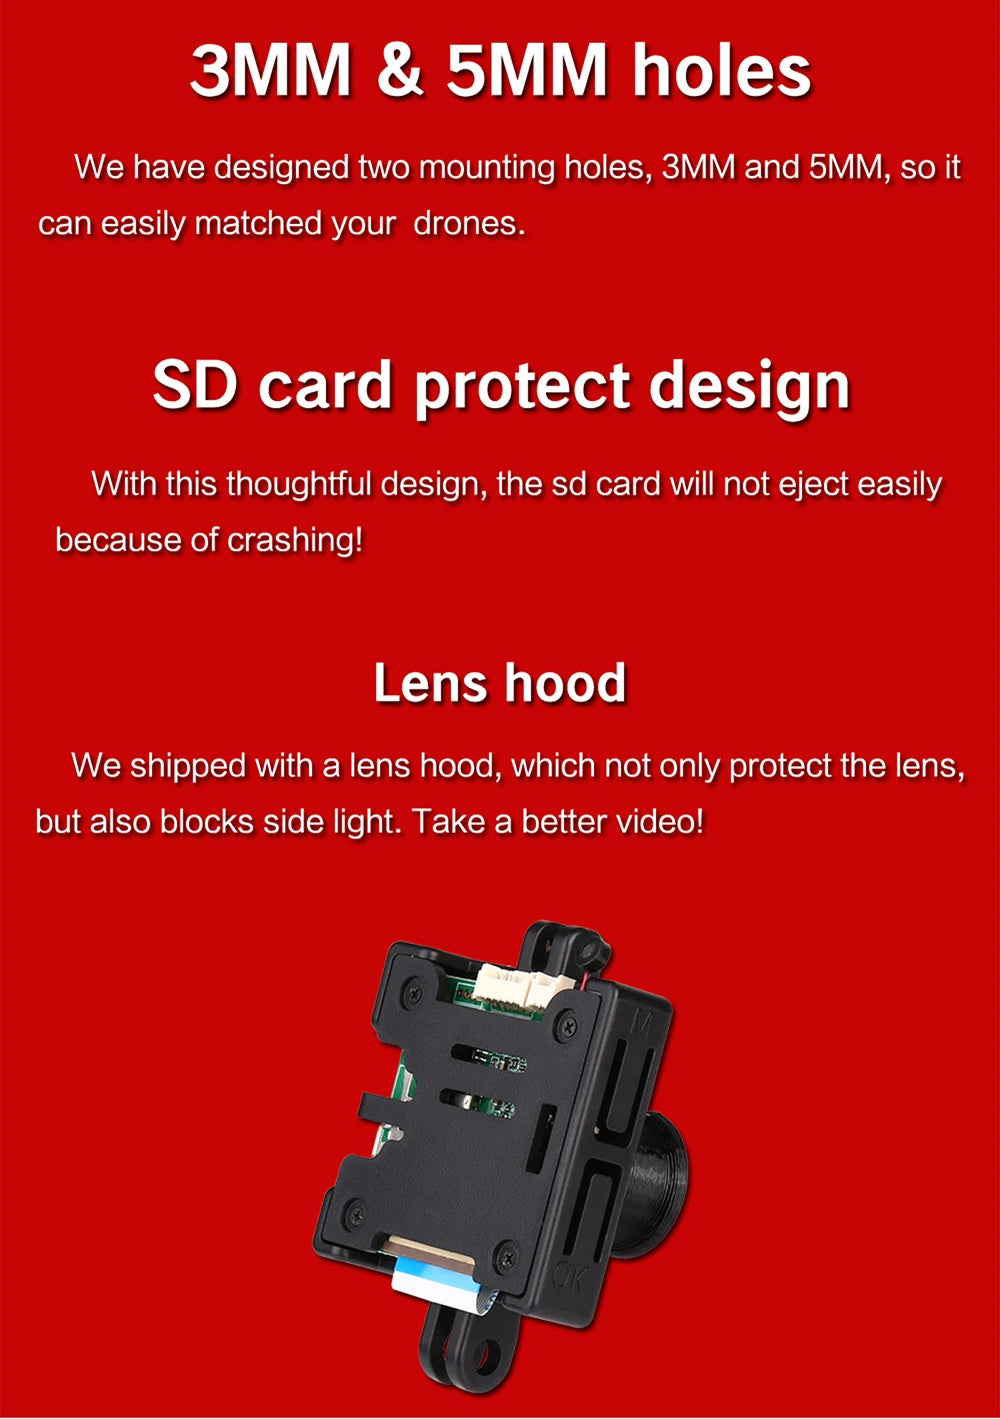 Hawkeye Firefly Nakedcam/Splite FPV Camera Drone, SD card protect design with thoughtful design, sd card won't eject easily